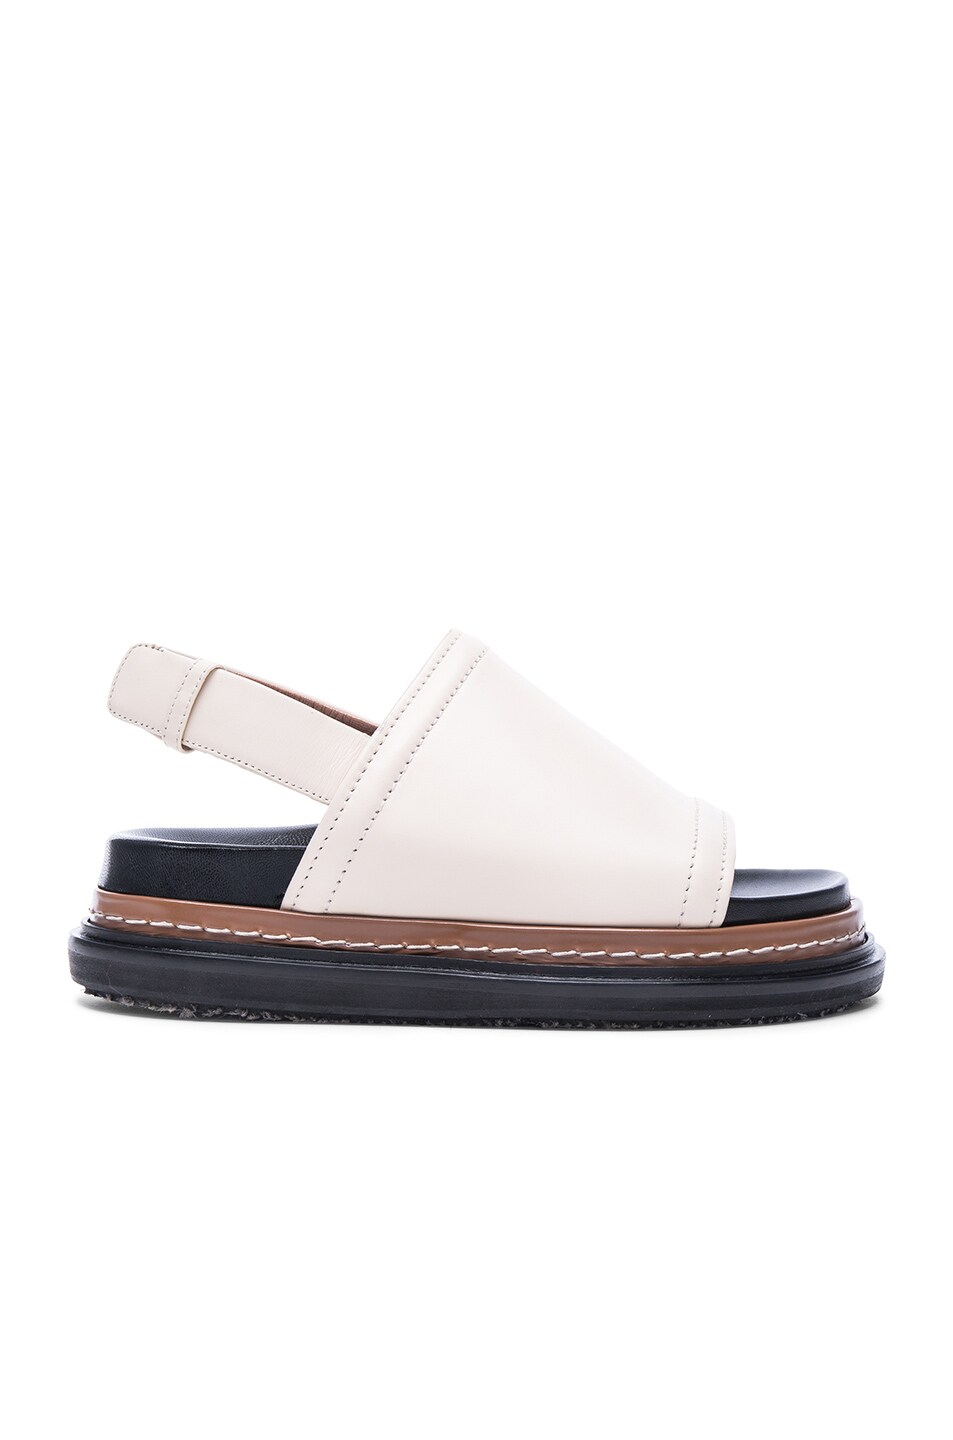 Image 1 of Marni Fussbett Leather Sandals in Silk White